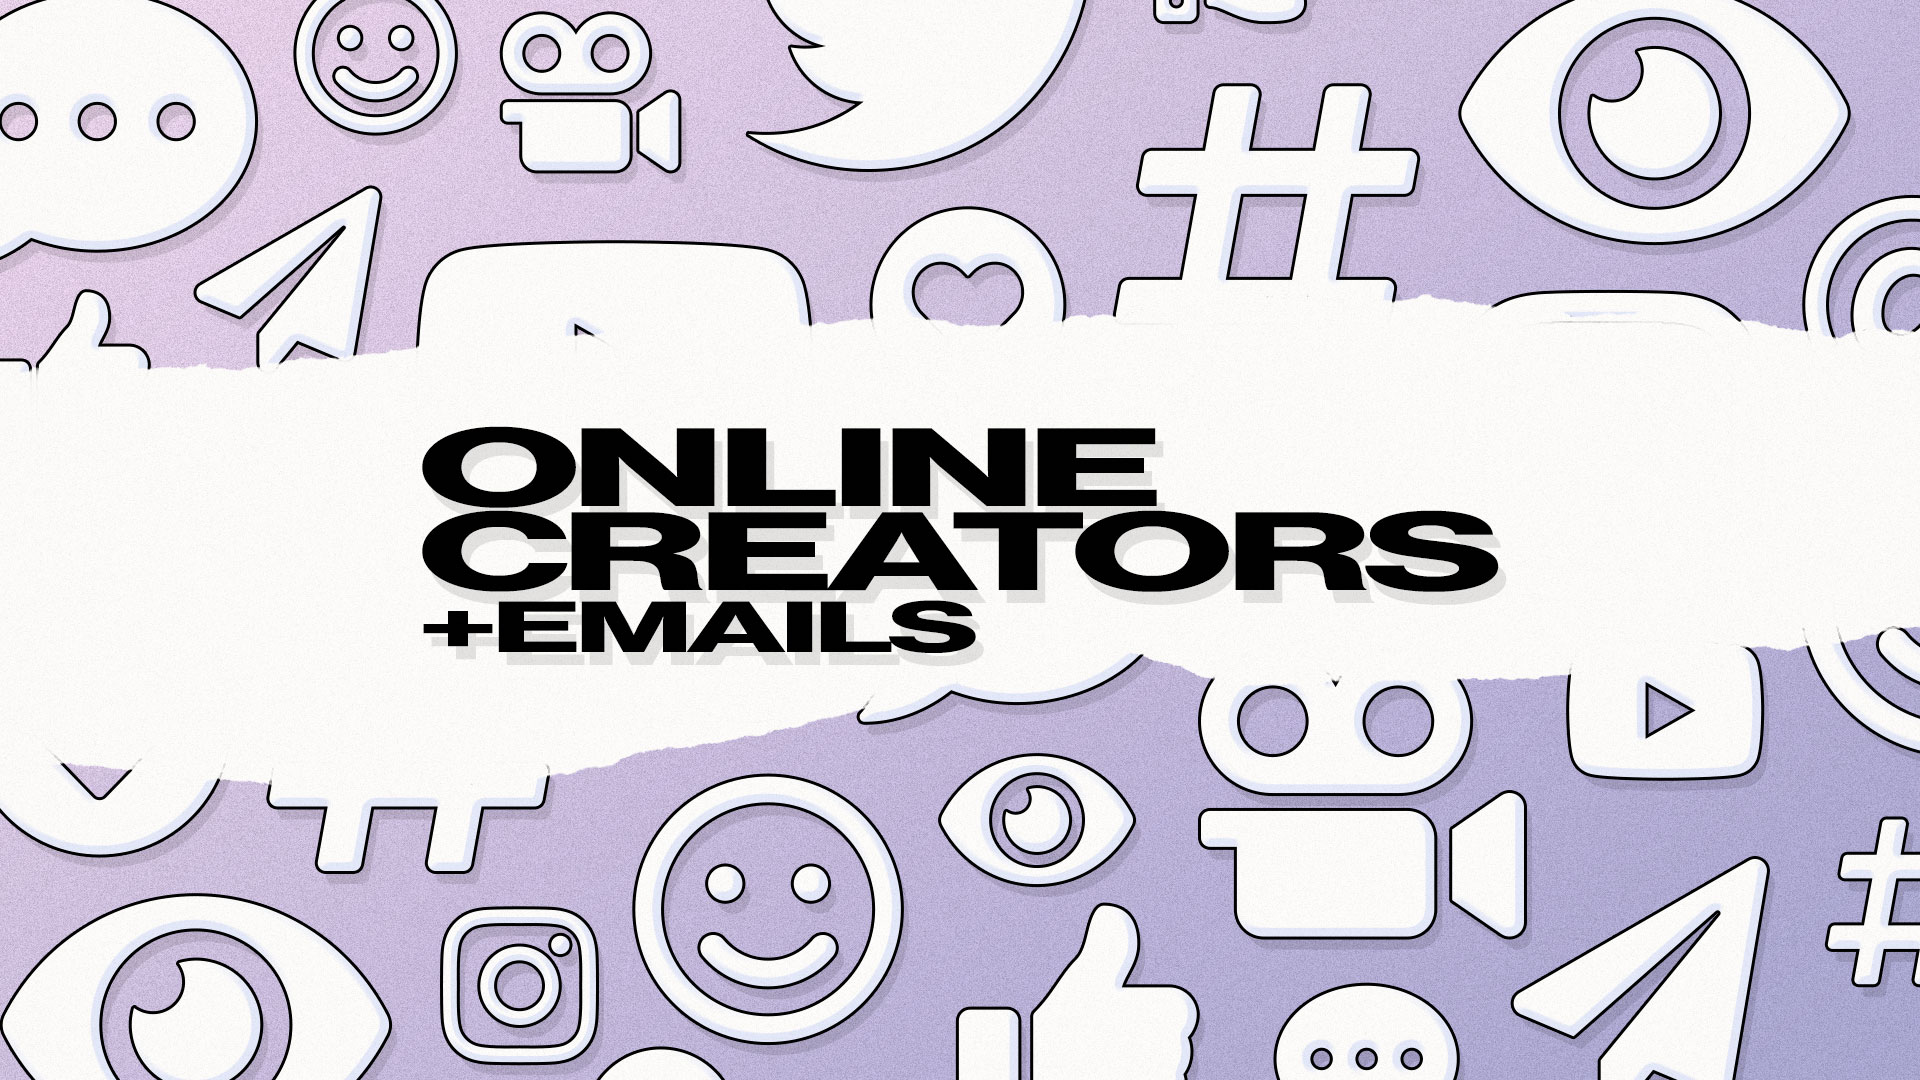 Why online creators need email addresses